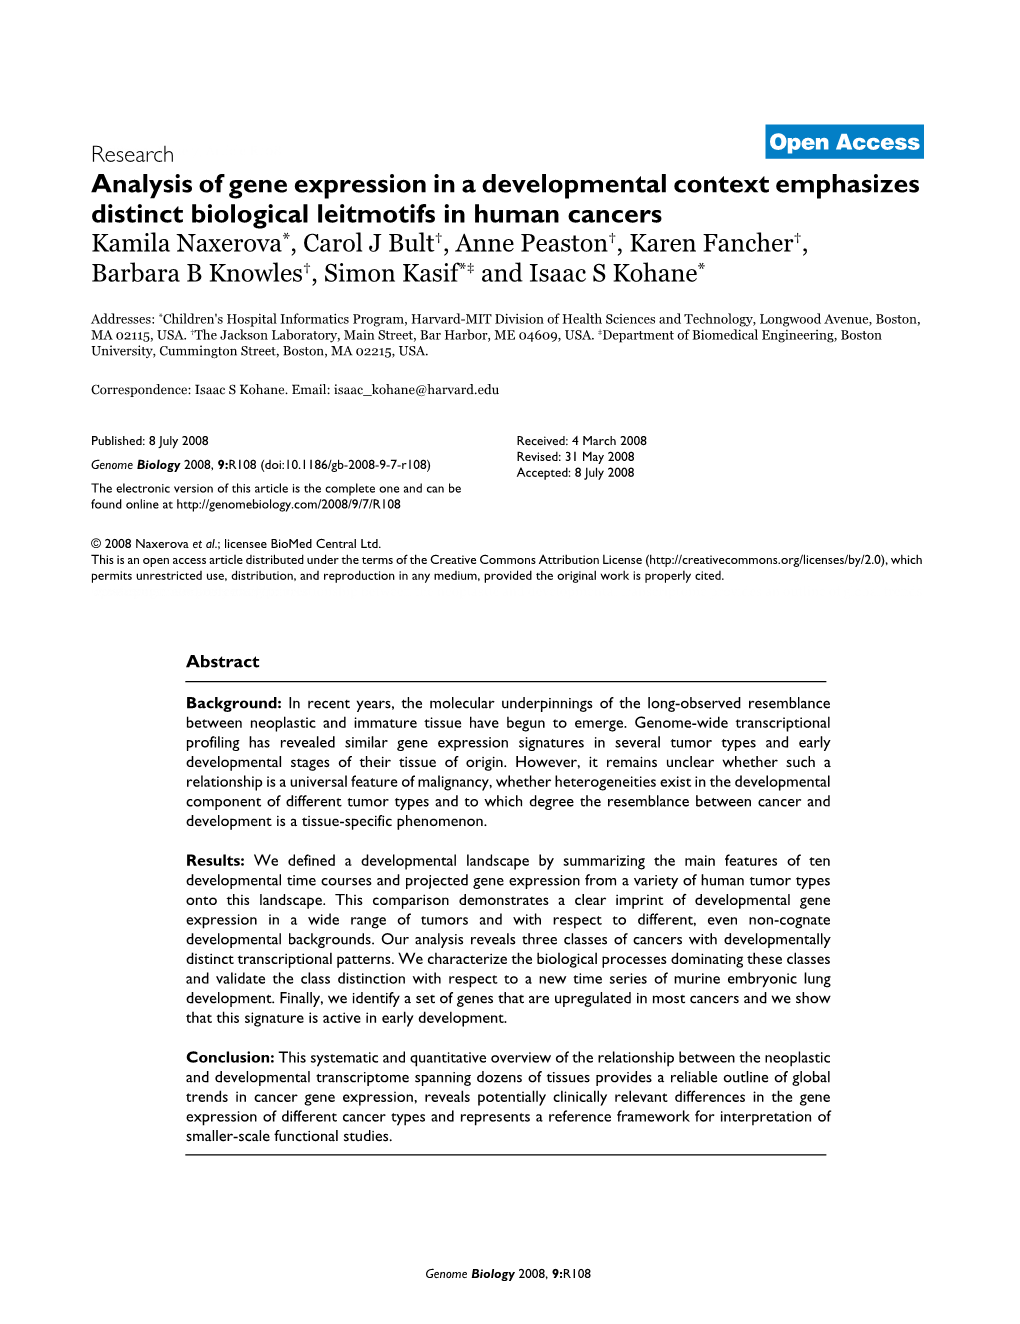 Analysis of Gene Expression in a Developmental Context Emphasizes